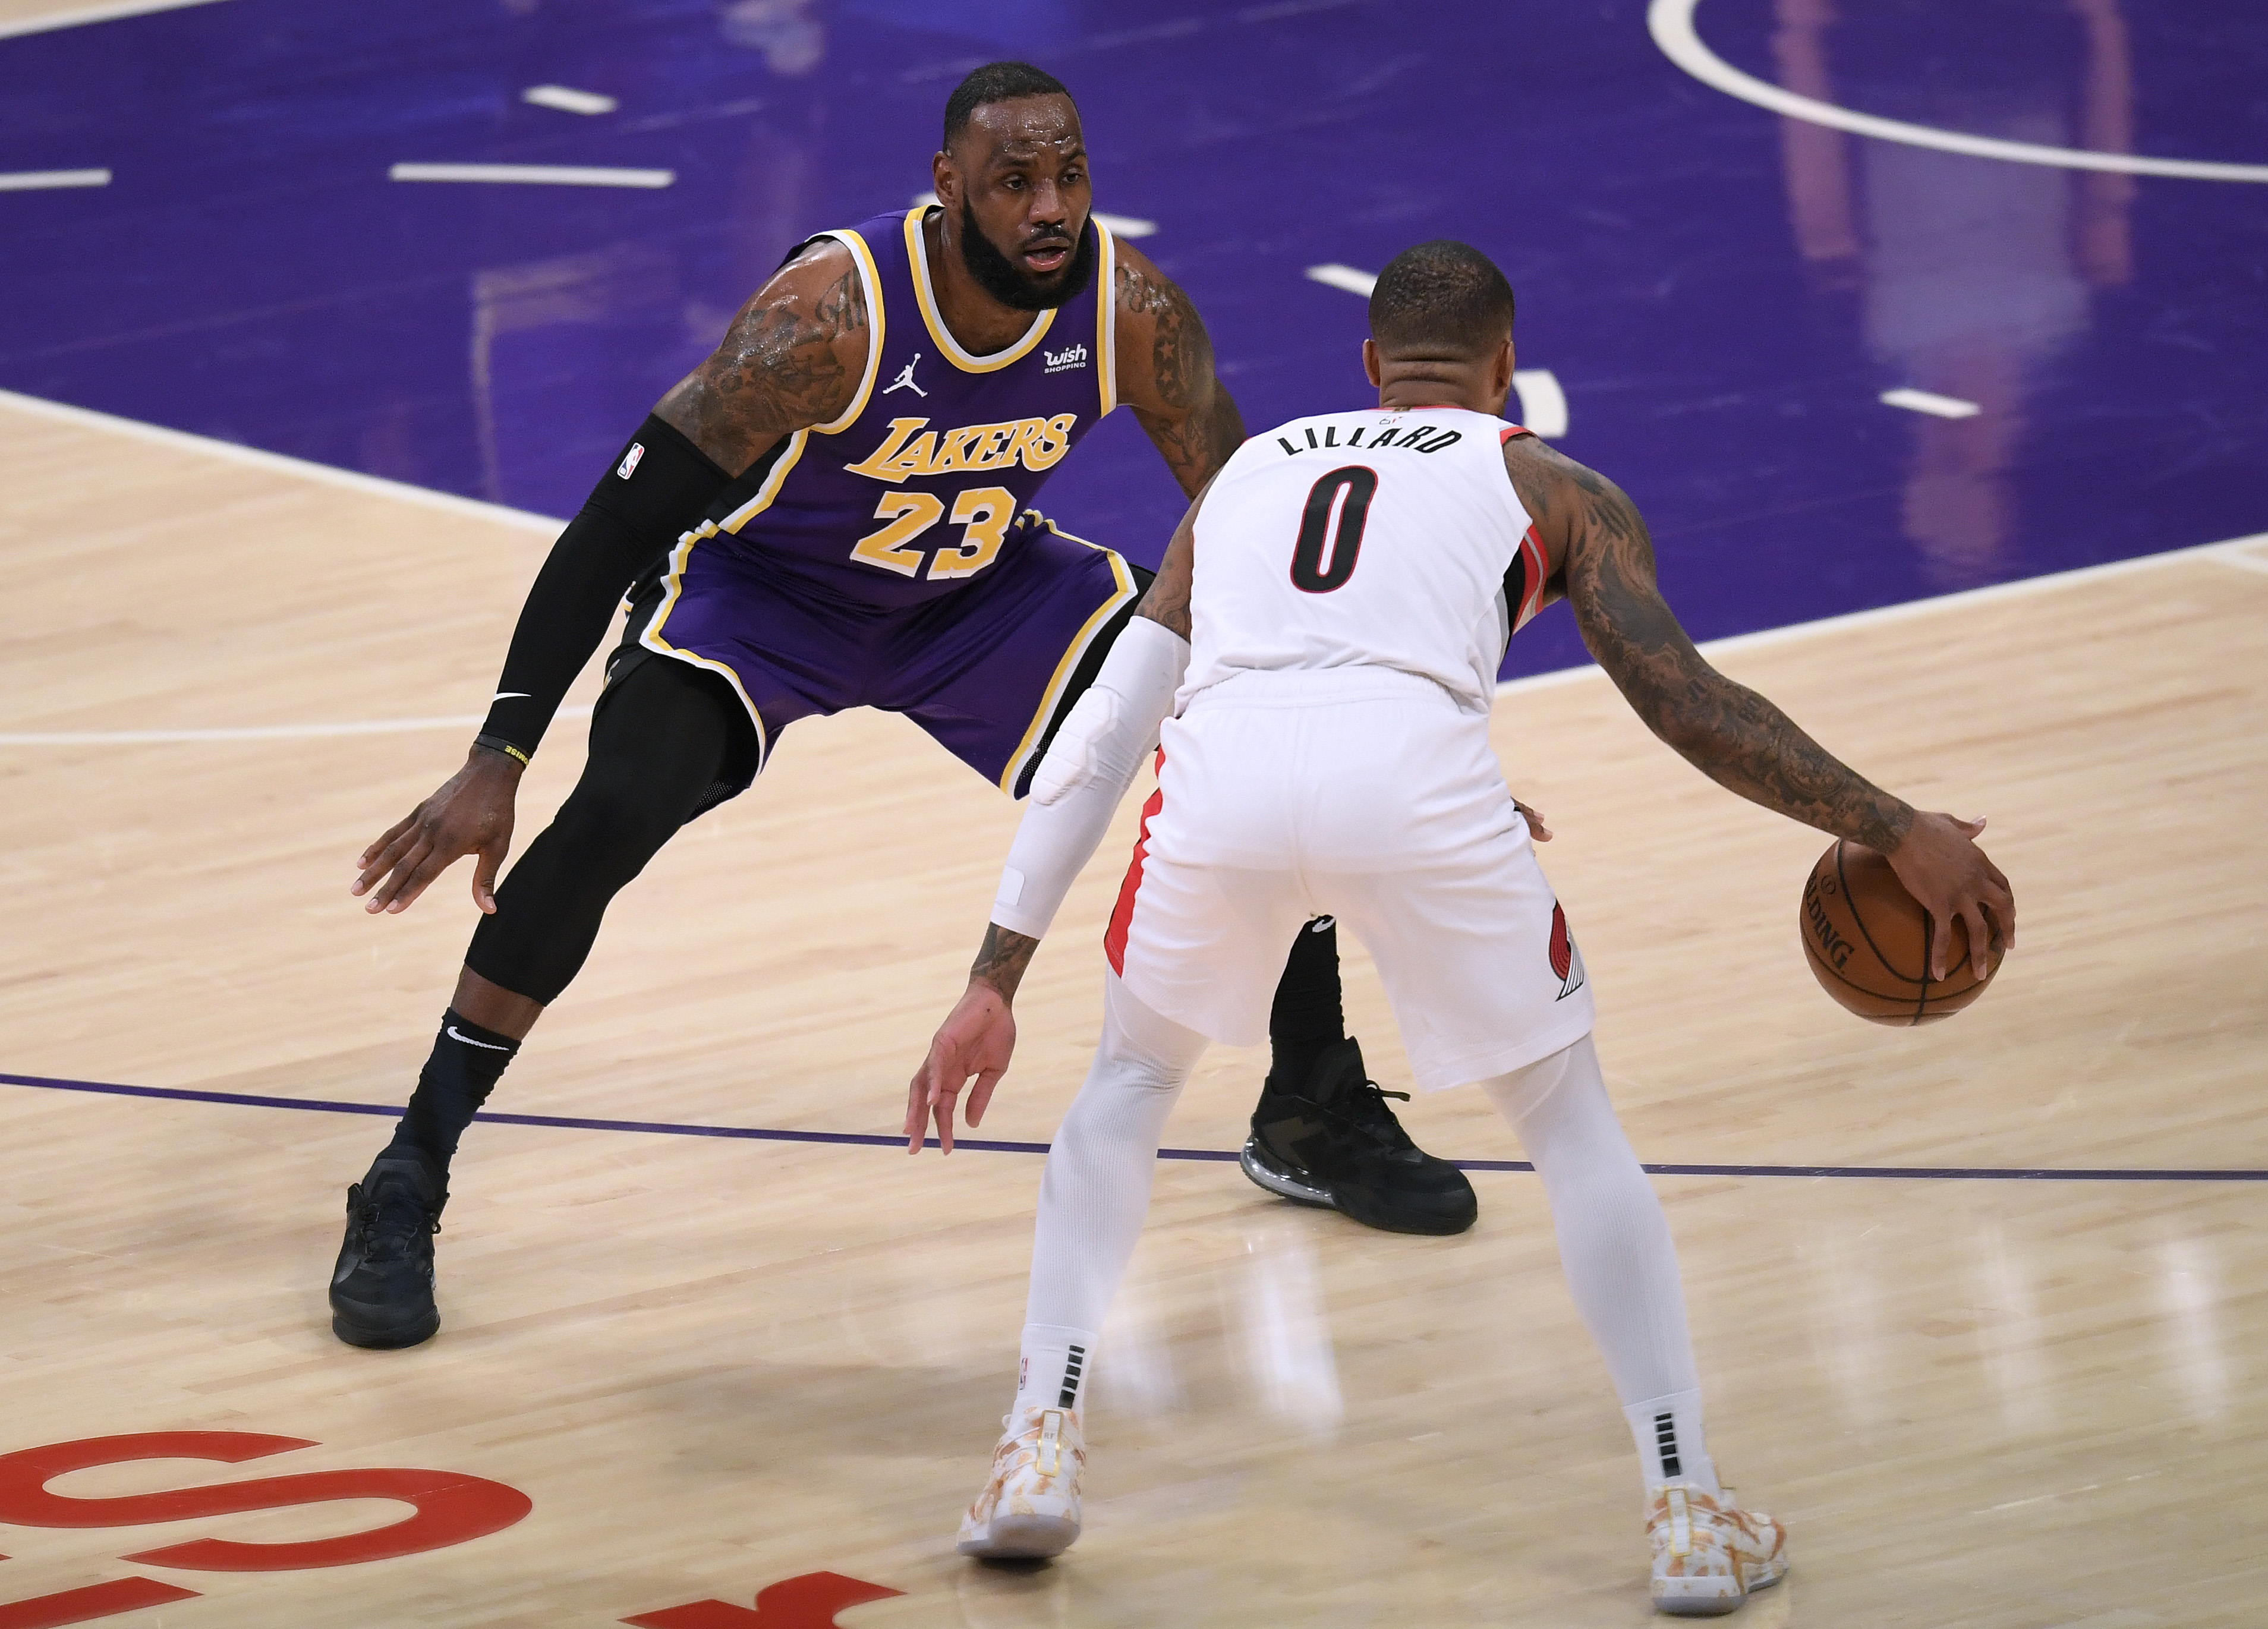 Los Angeles Lakers star LeBron James guards Portland Trail Blazers guard Damian Lillard during a game in February 2021